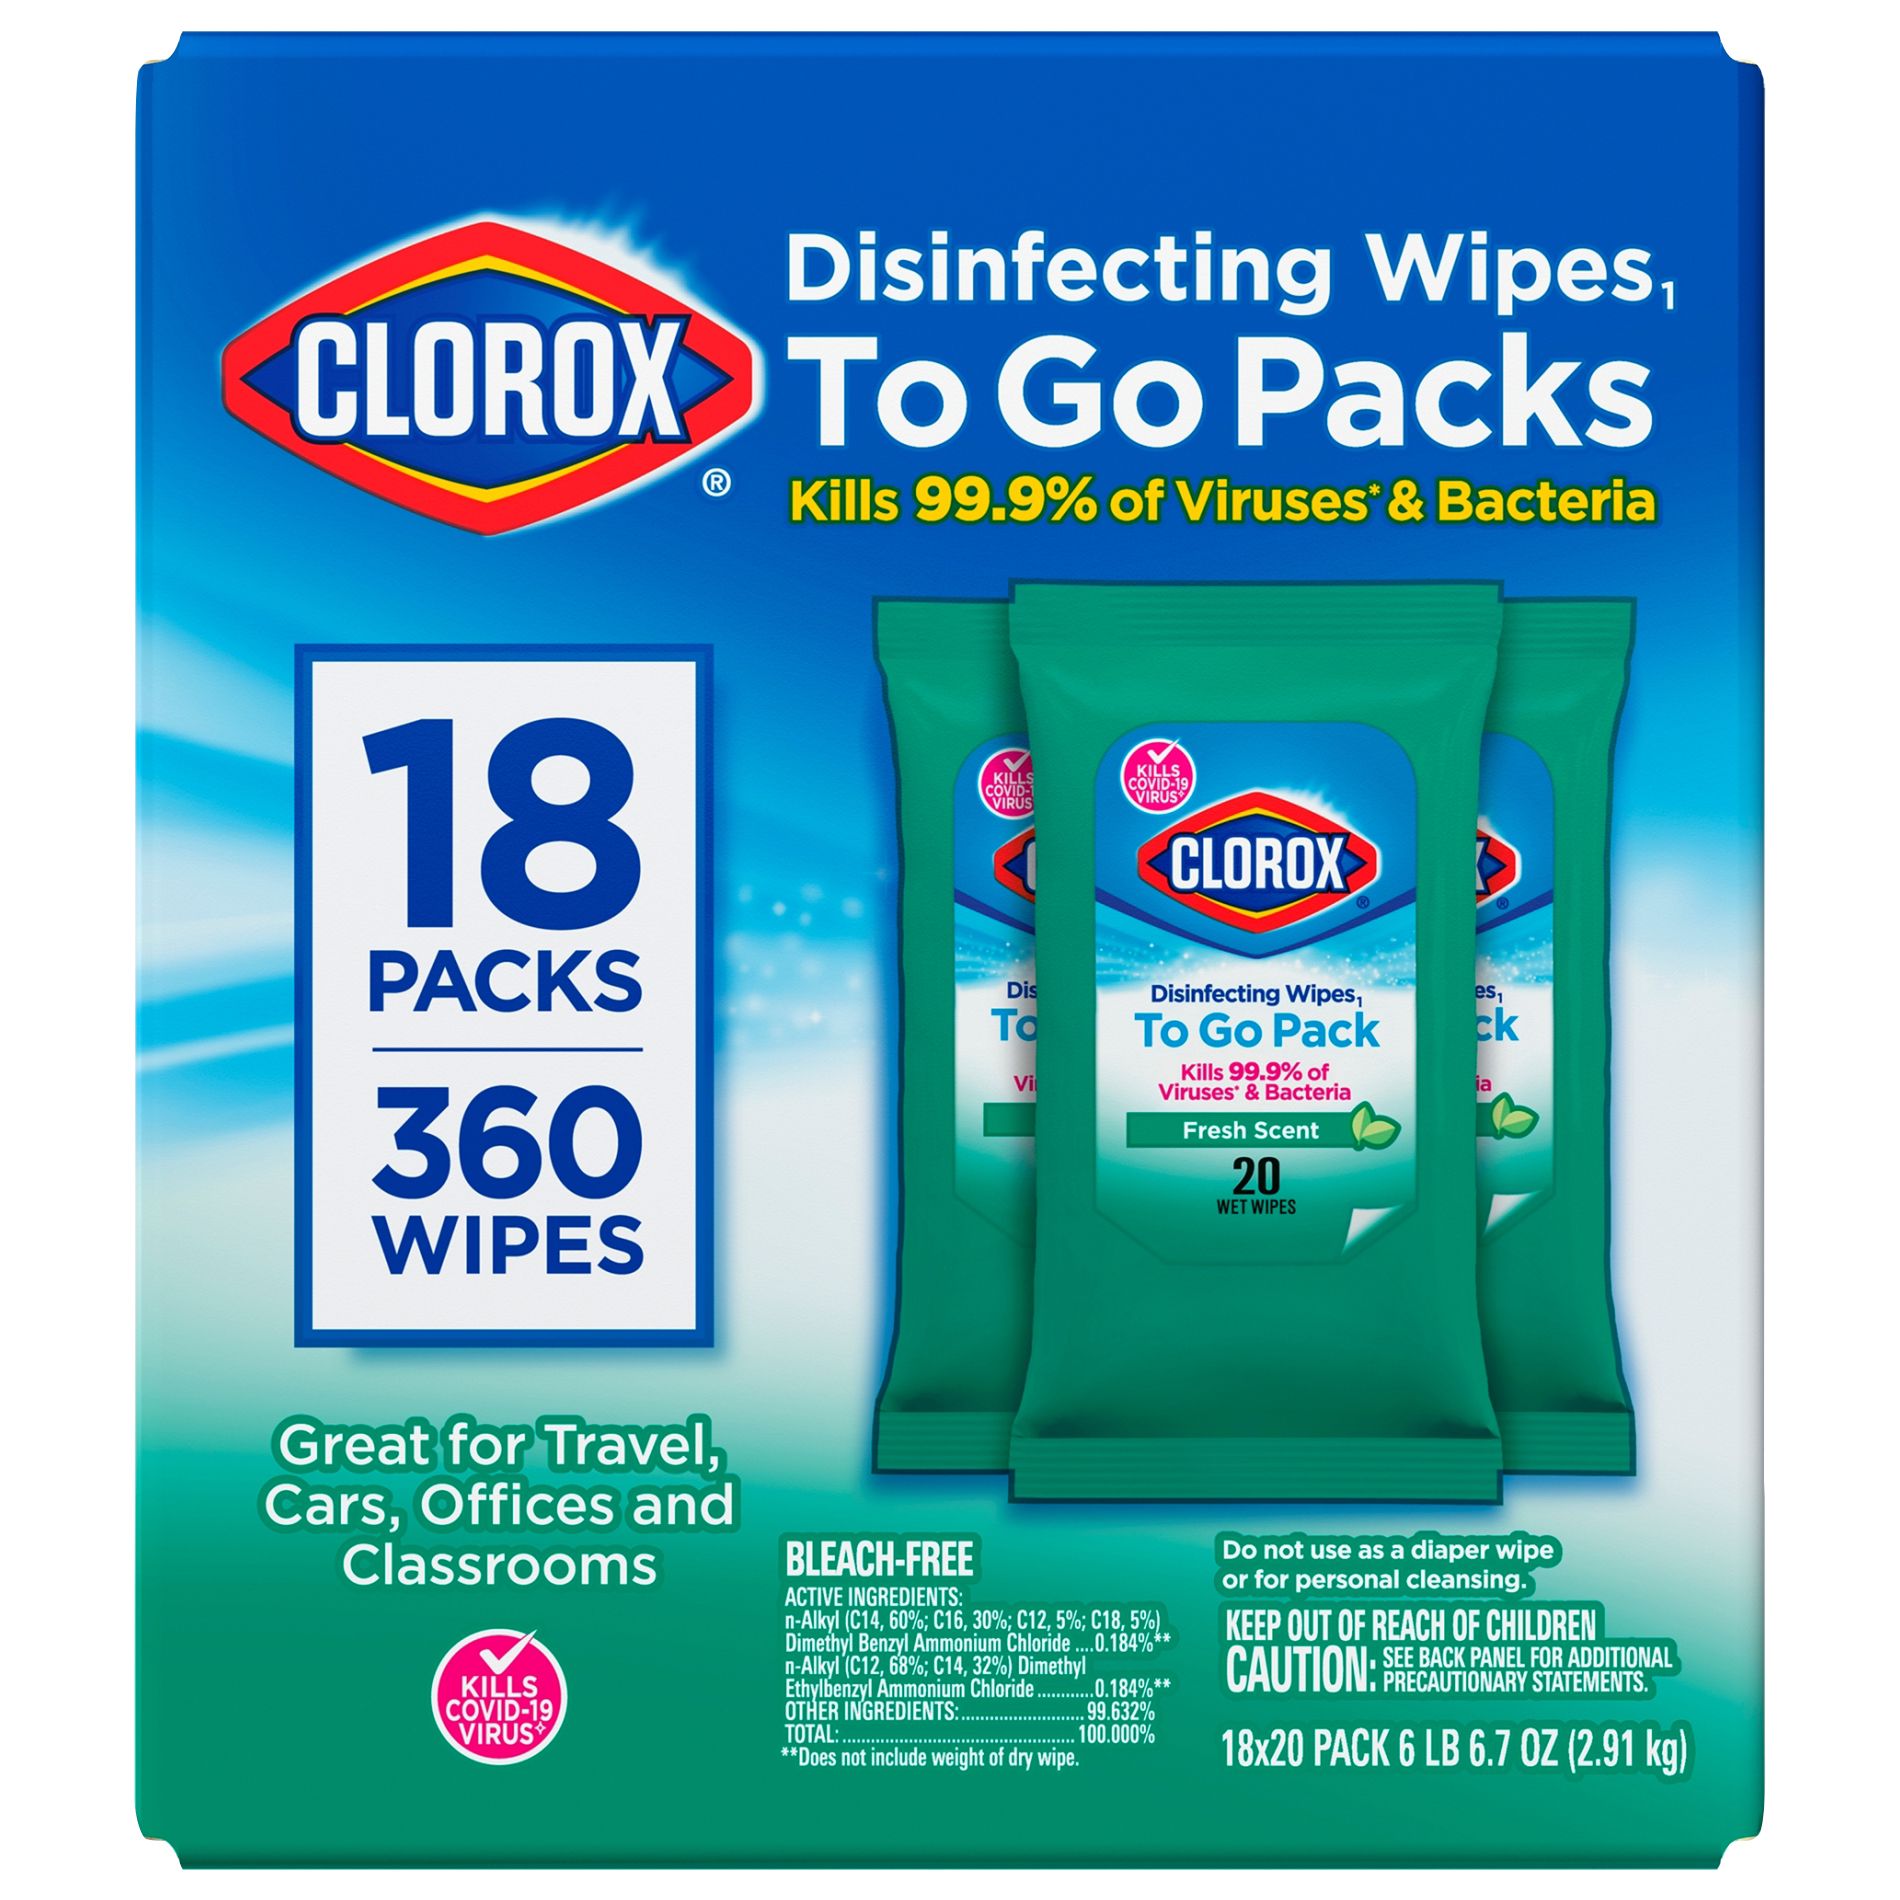 Clorox Disinfecting Wipes Value Pack Bleach Free Cleaning Wipes